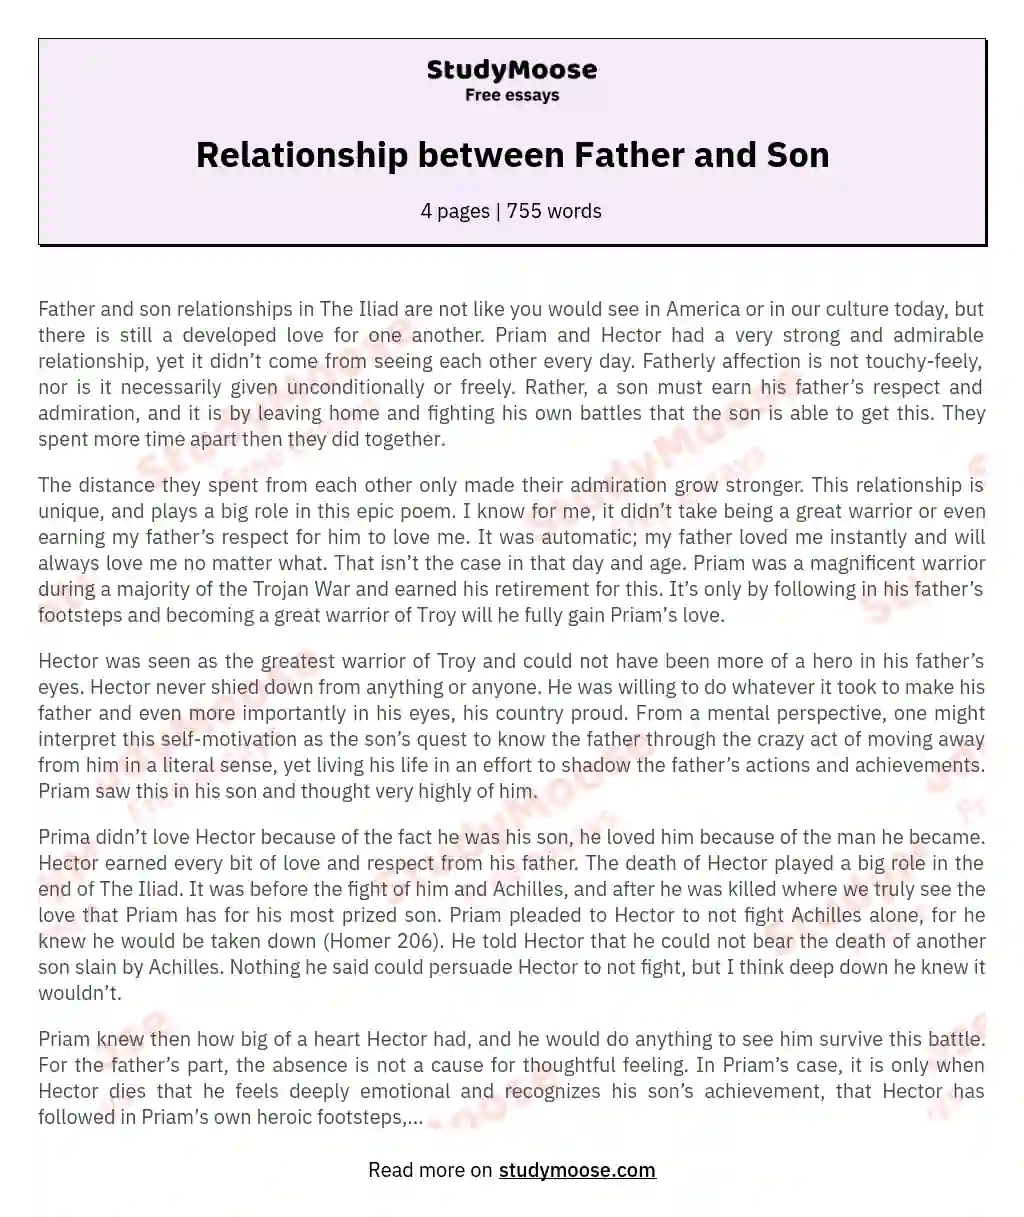 Relationship between Father and Son